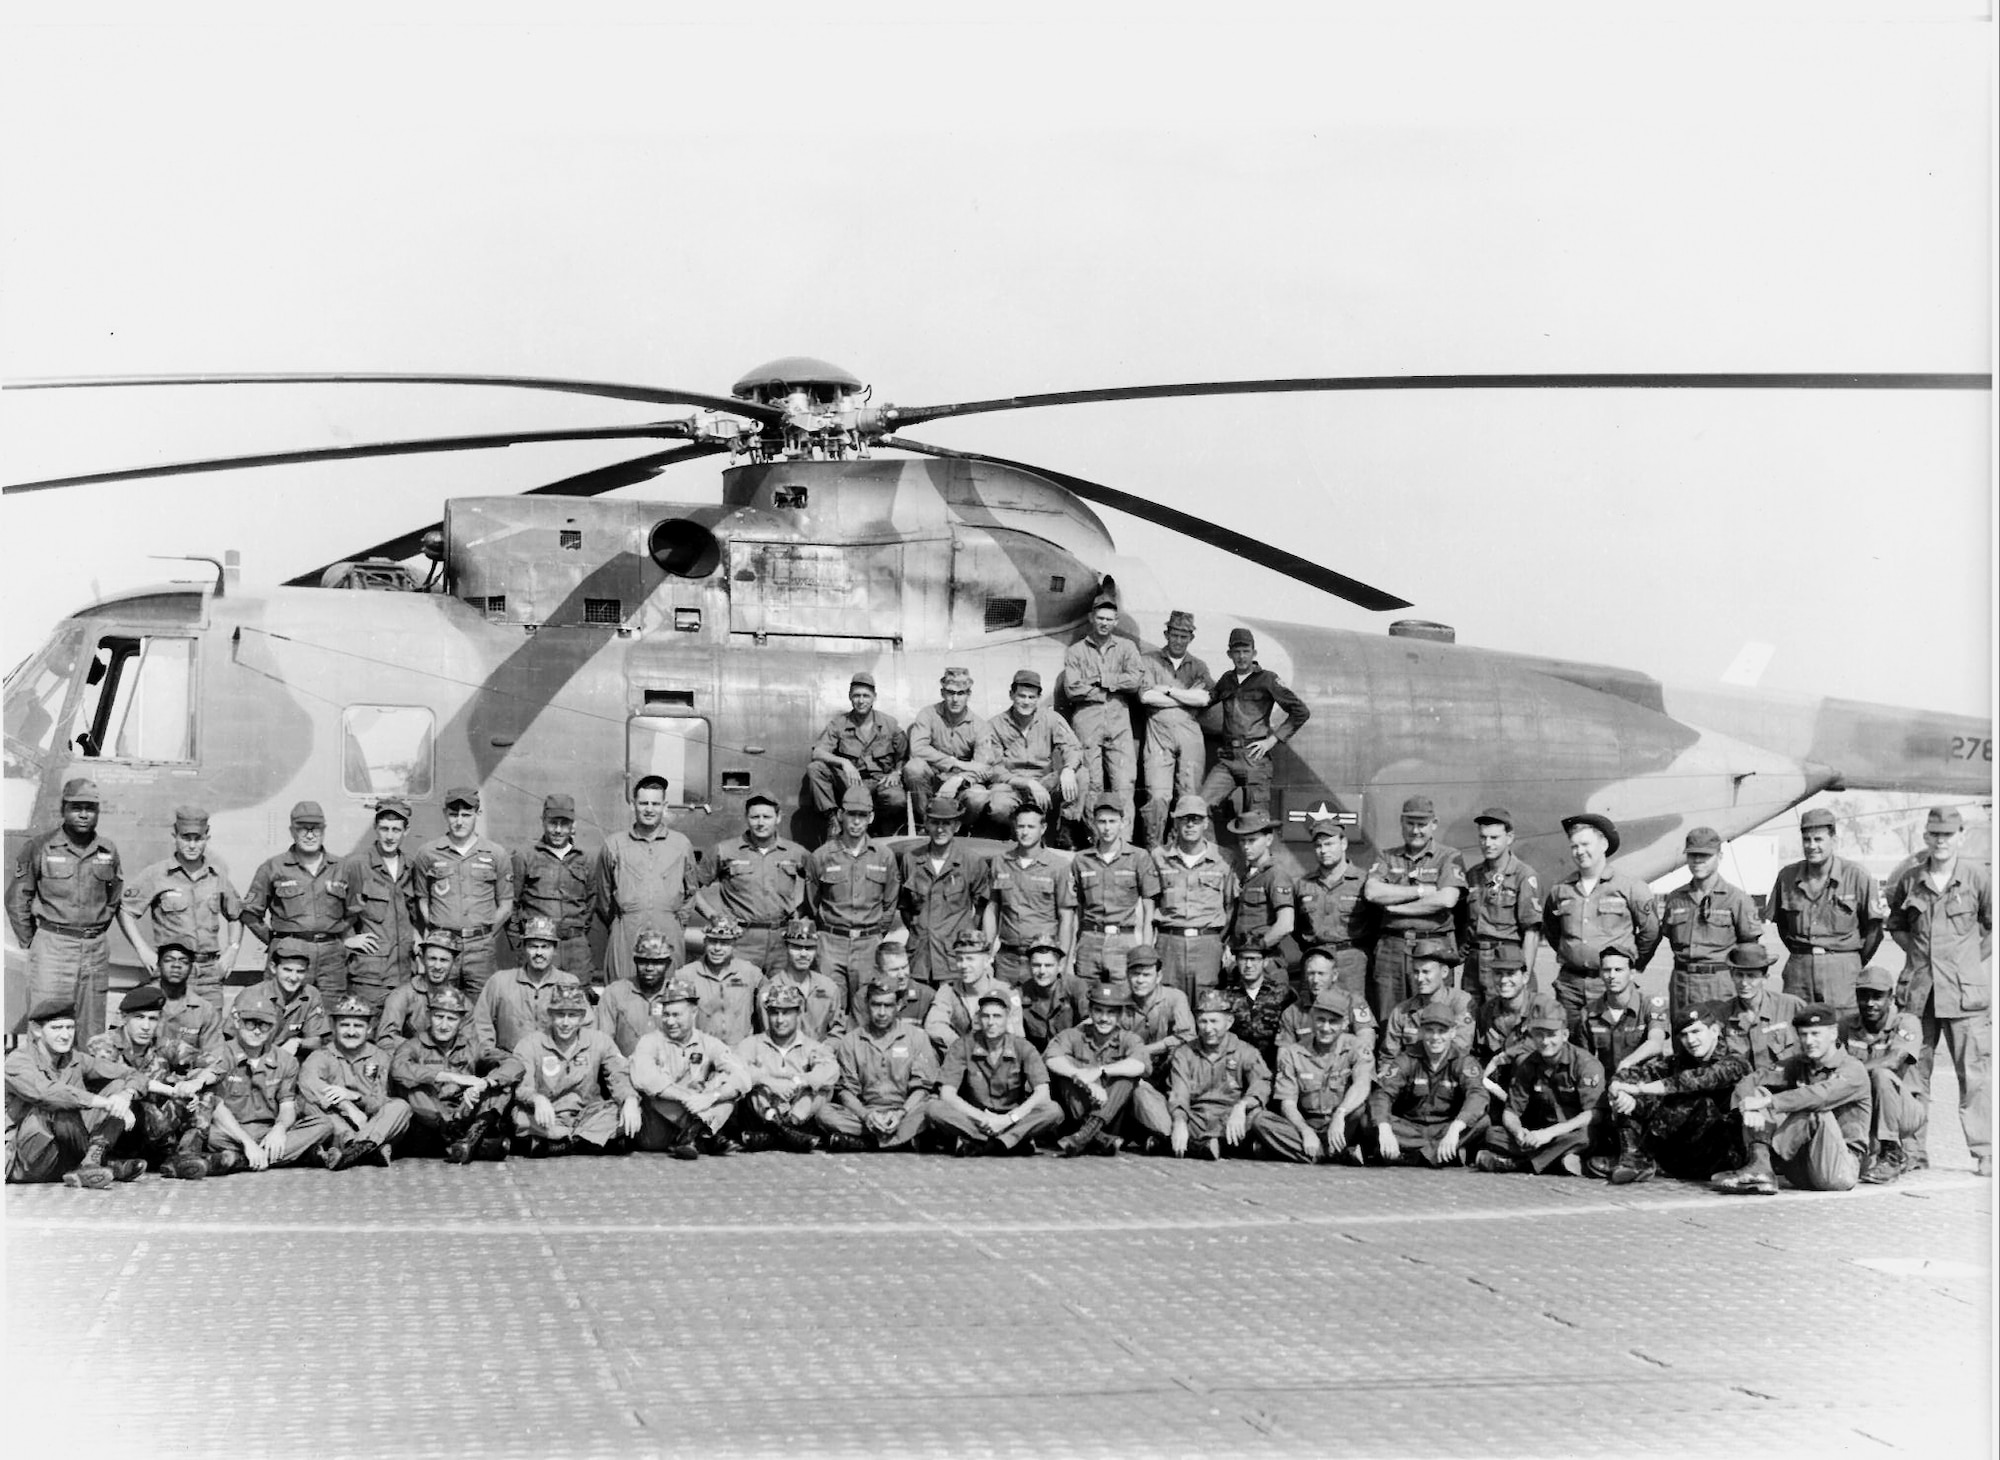 Members of the 58th Special Operations Squadron take a group photo in front of a Sikorsky SH-3 at Kirtland Air Force Base, New Mexico. In January 1993, the 377th Air Base Wing activated becoming the host unit for Kirtland while the 542nd became a tenant. The following year, the 542nd deactivated and the 58th SOW activated, becoming the wing we know today. (Courtesy Photo)